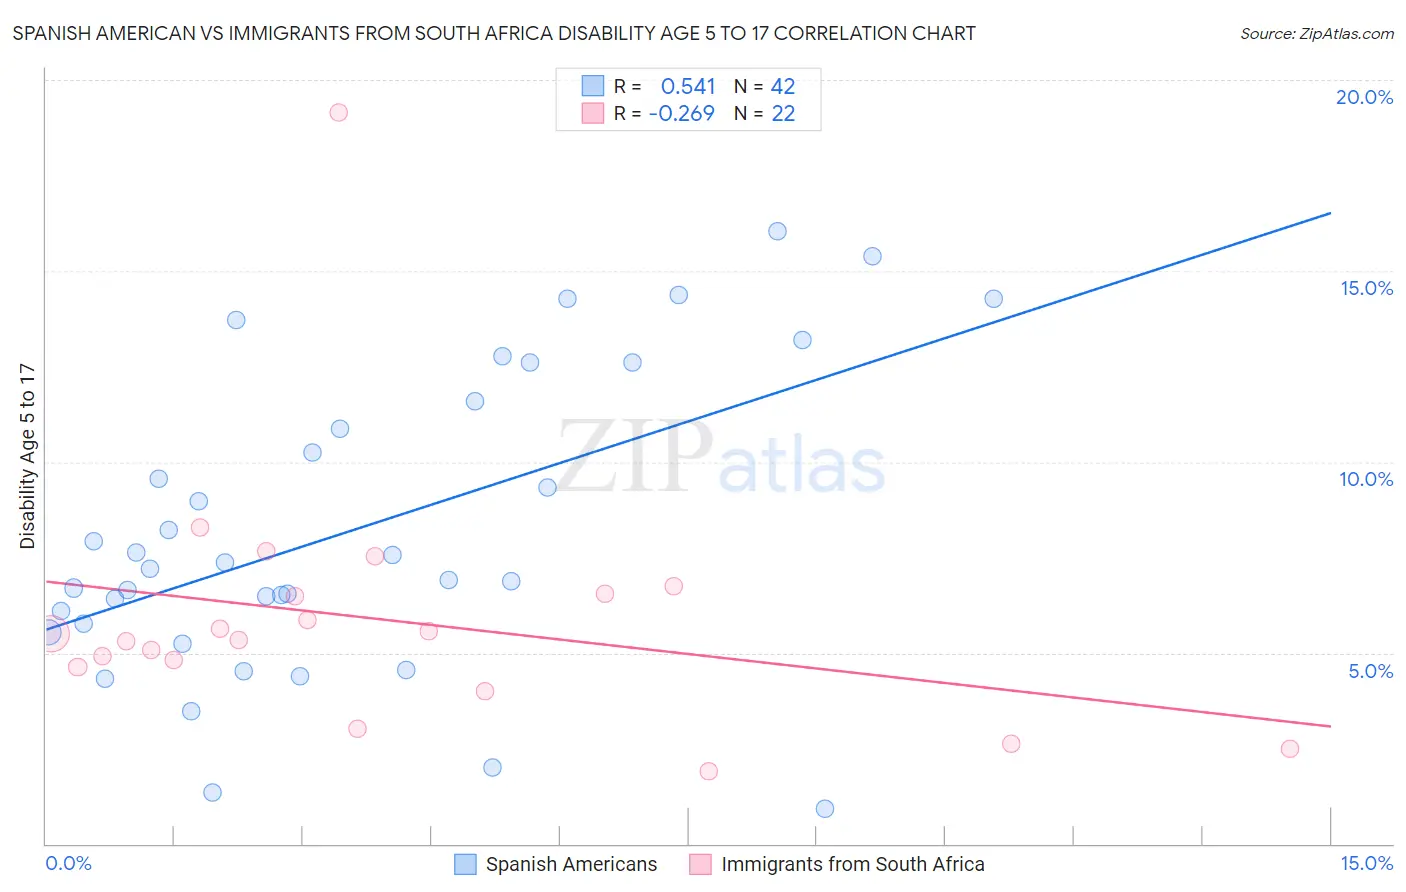 Spanish American vs Immigrants from South Africa Disability Age 5 to 17